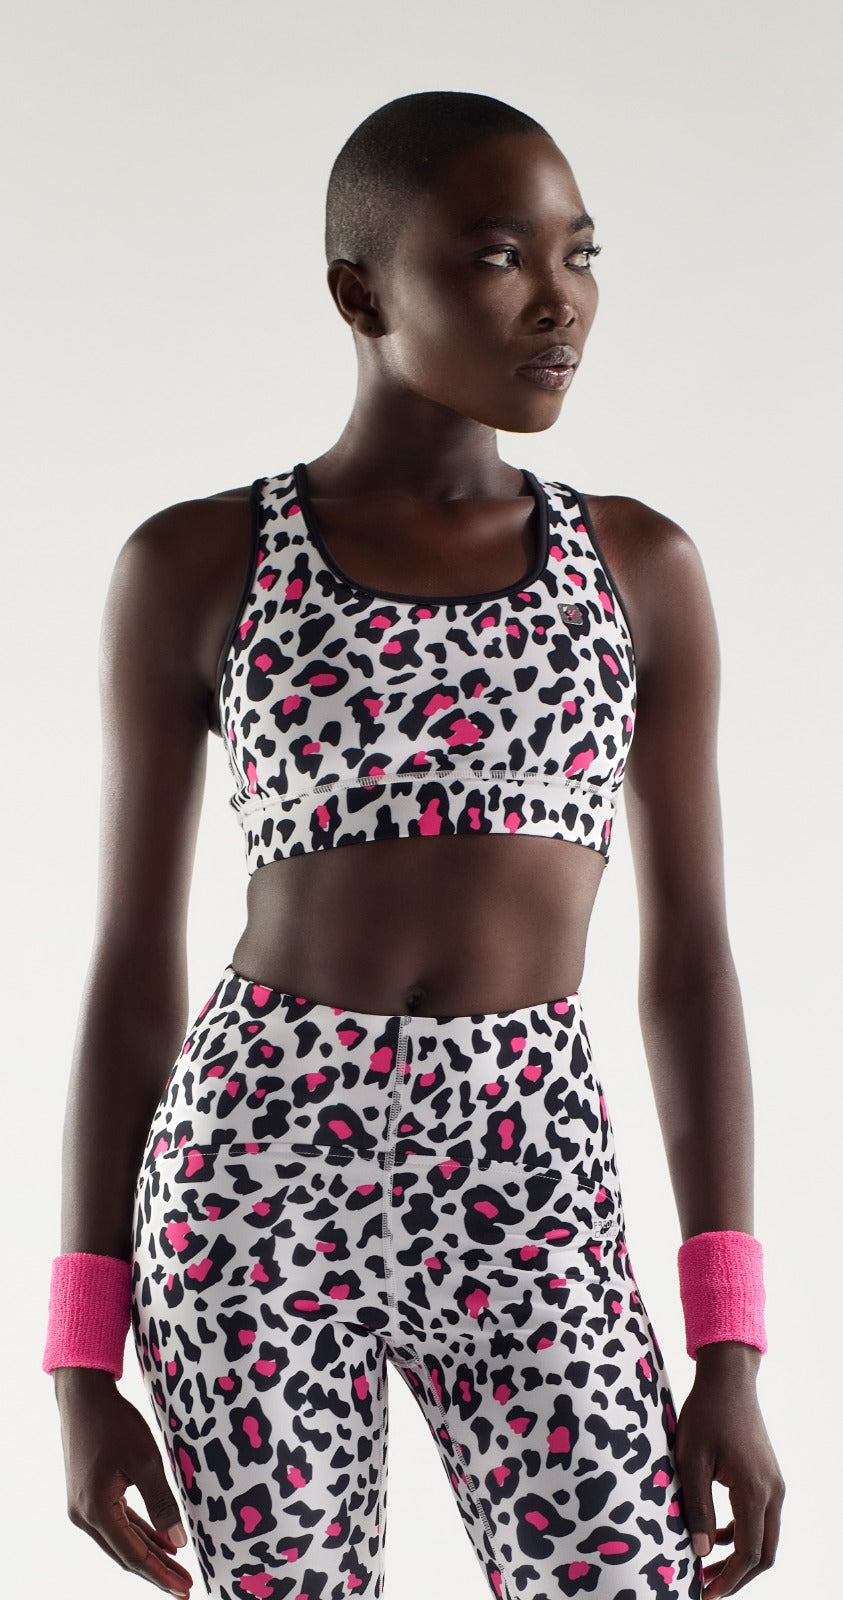 SUPER HIGH-RISE 7/8 SUPERFIT LEGGINGS IN ECO D.I.W.O.® WITH ALL-OVER PRINT - Leopard Animalier-Fucsia